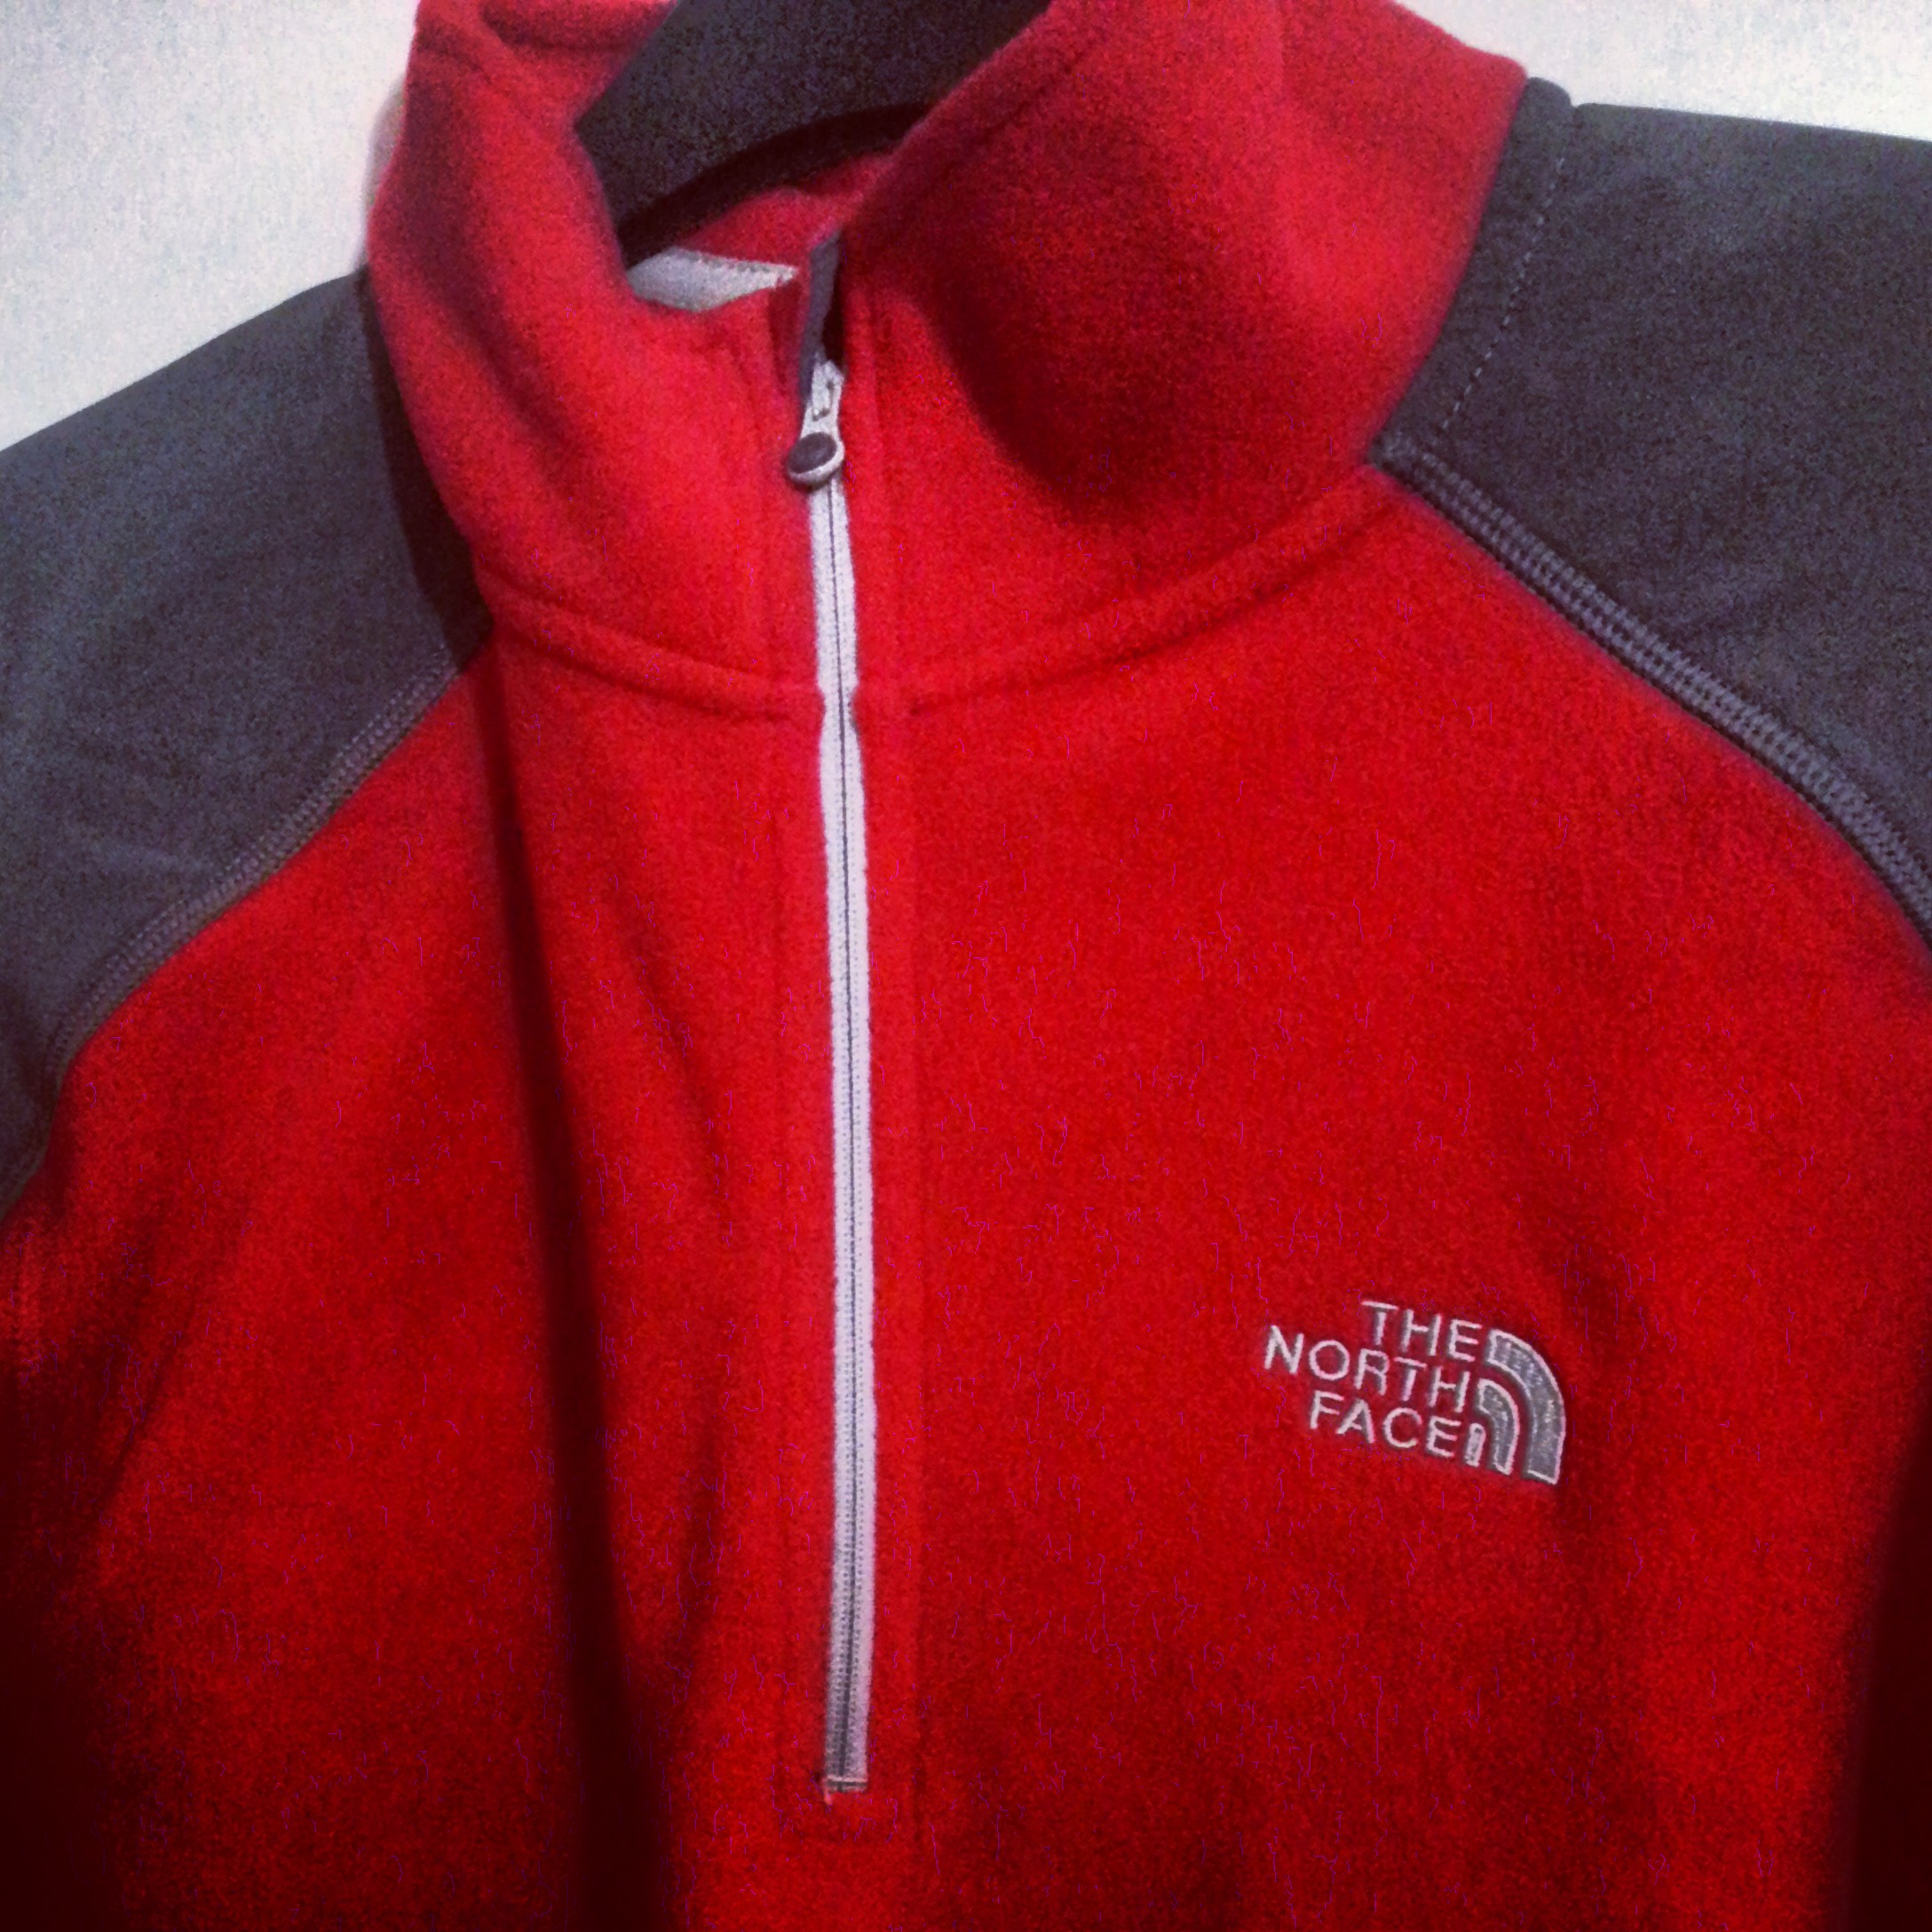 Warmth without the weight: Face North fleece Polartec